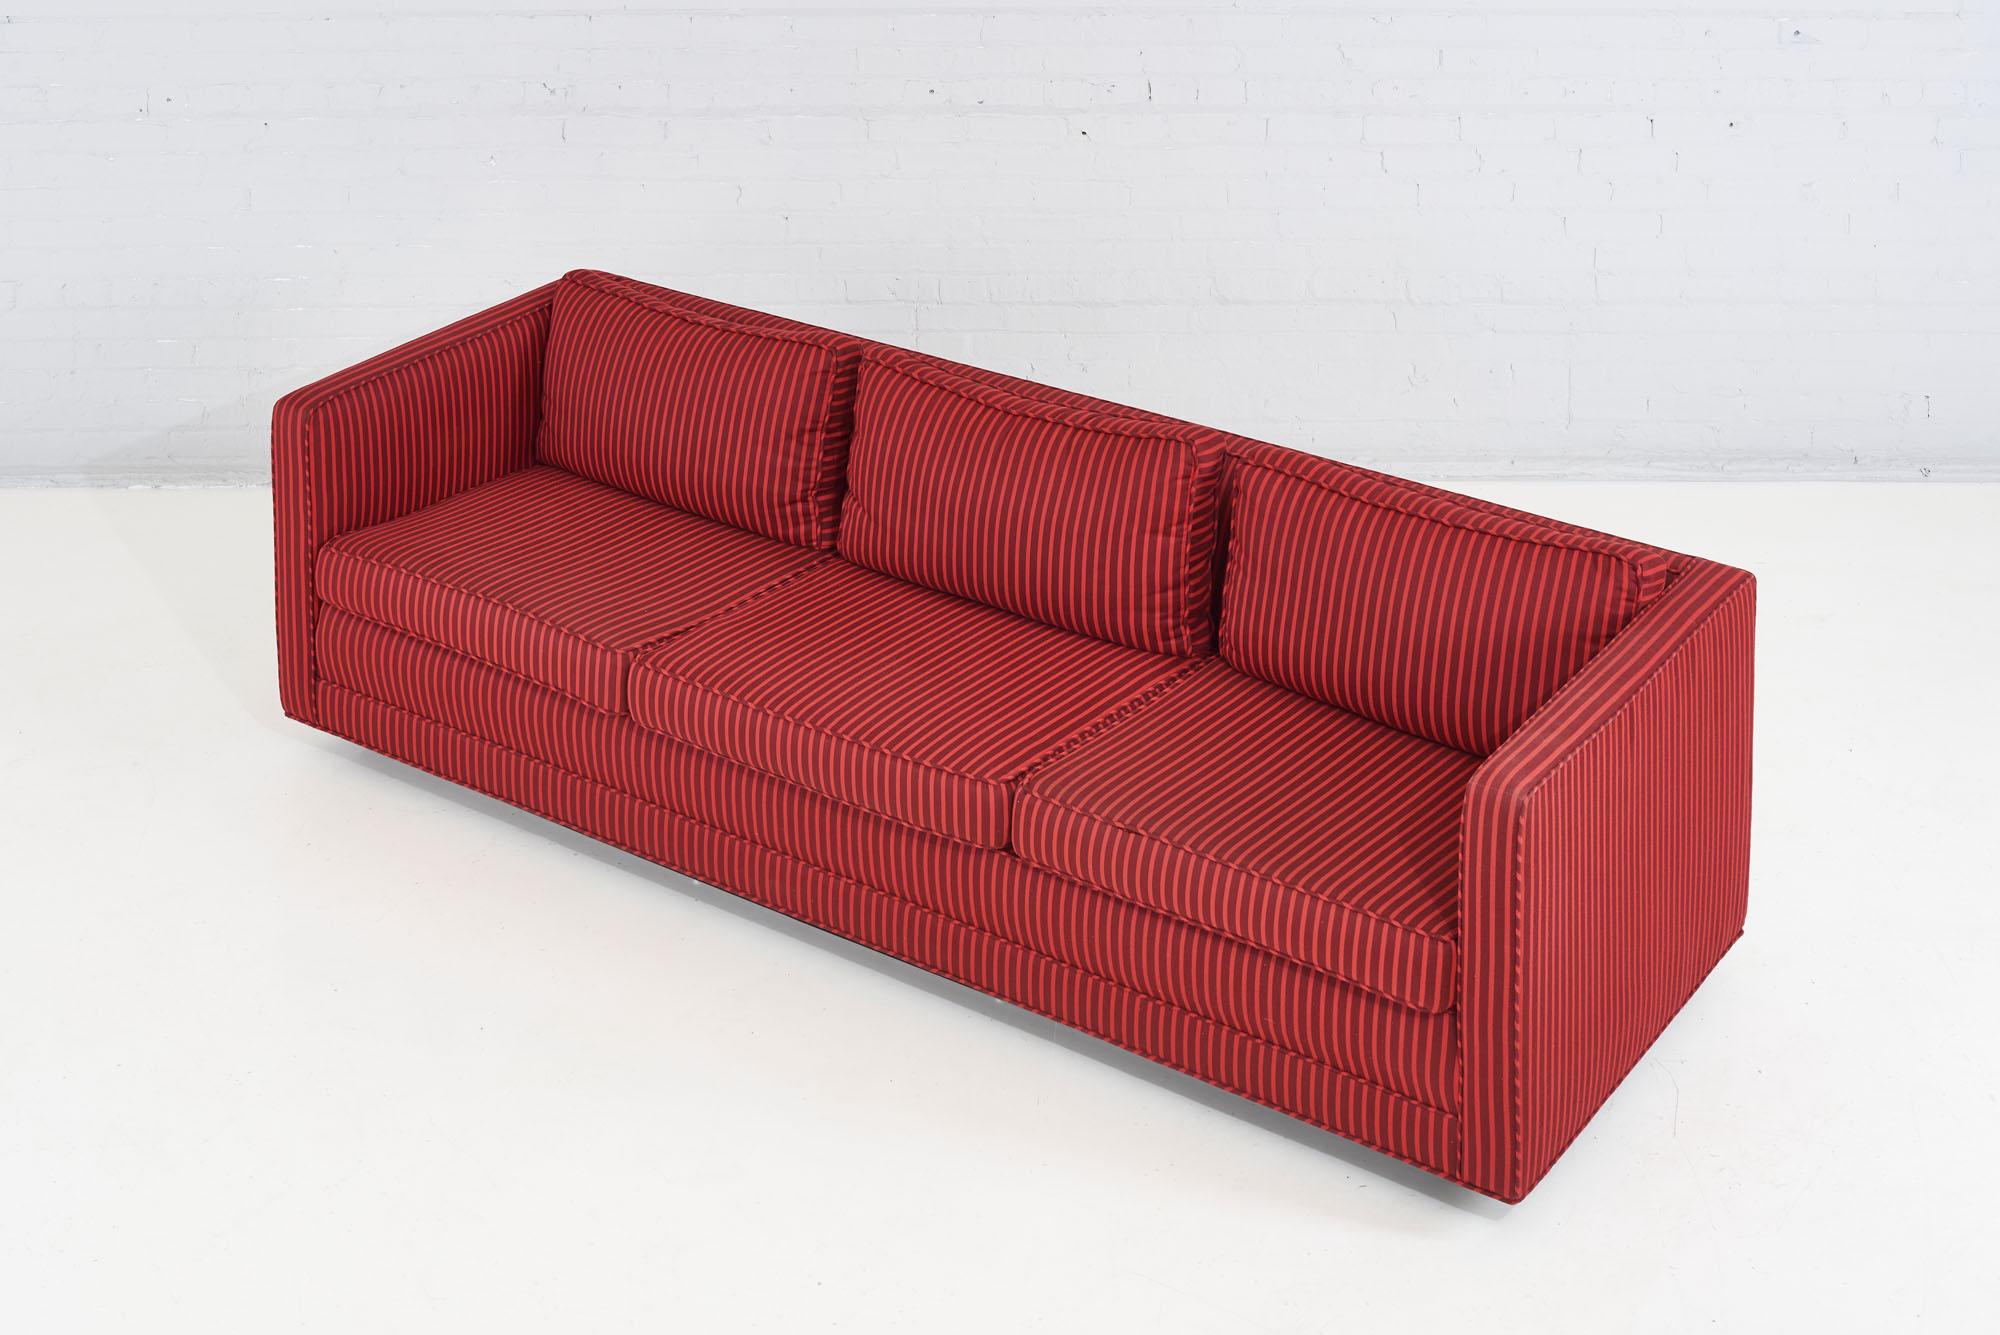 Dunbar Tuxedo Sofa Plinth Base, 1970 In Good Condition For Sale In Chicago, IL